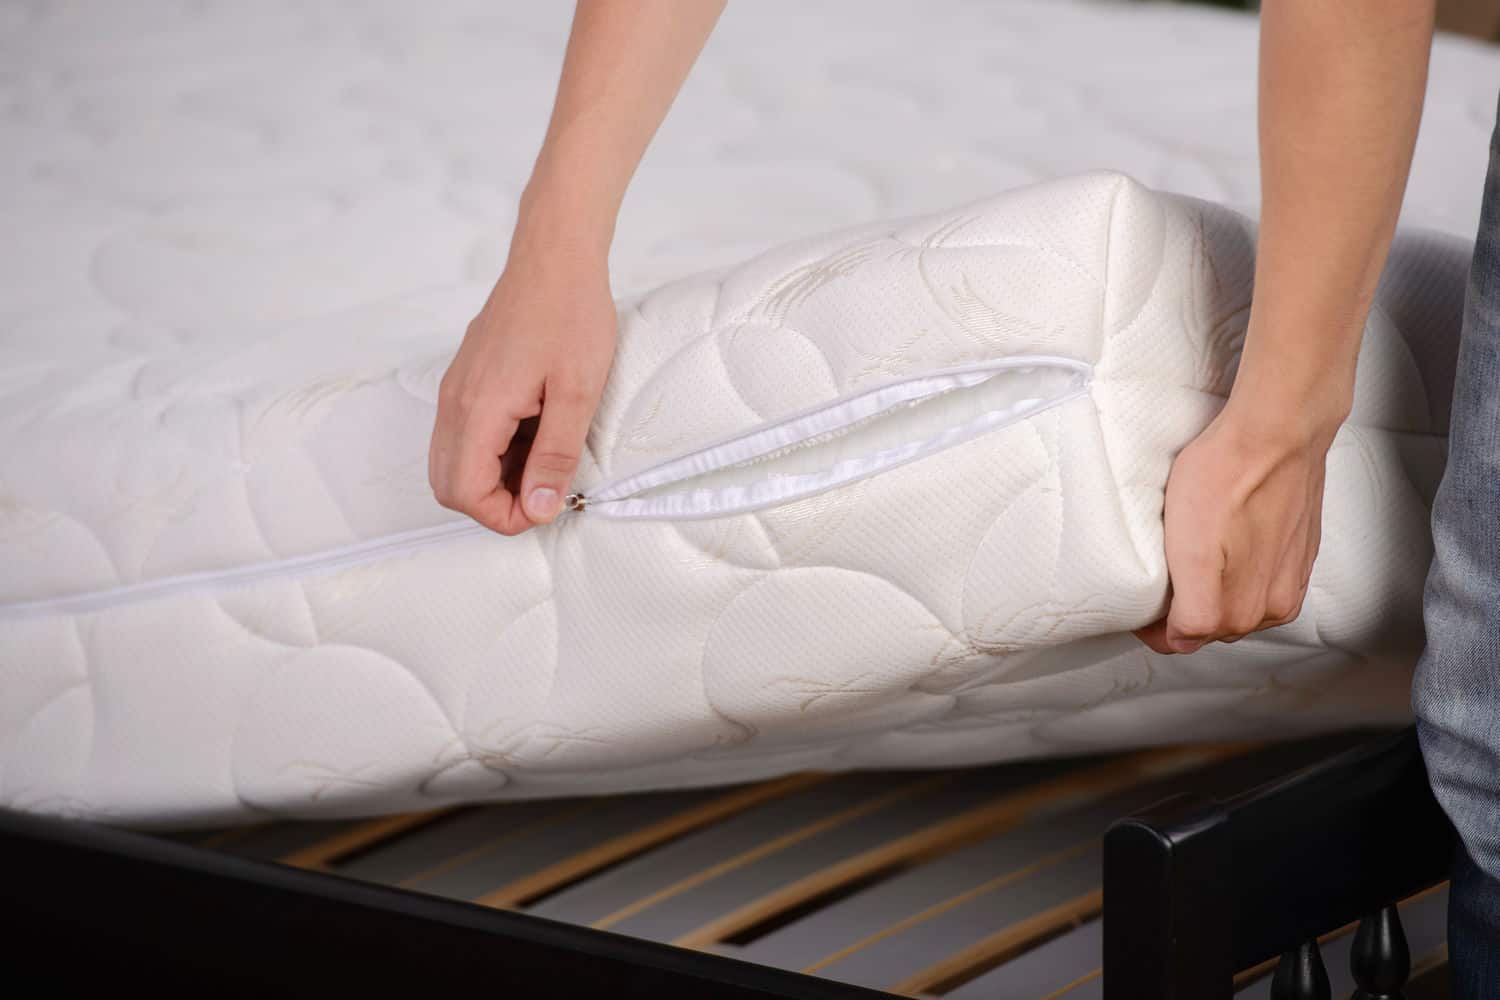 Two hands lifting up white mattress from bed frame